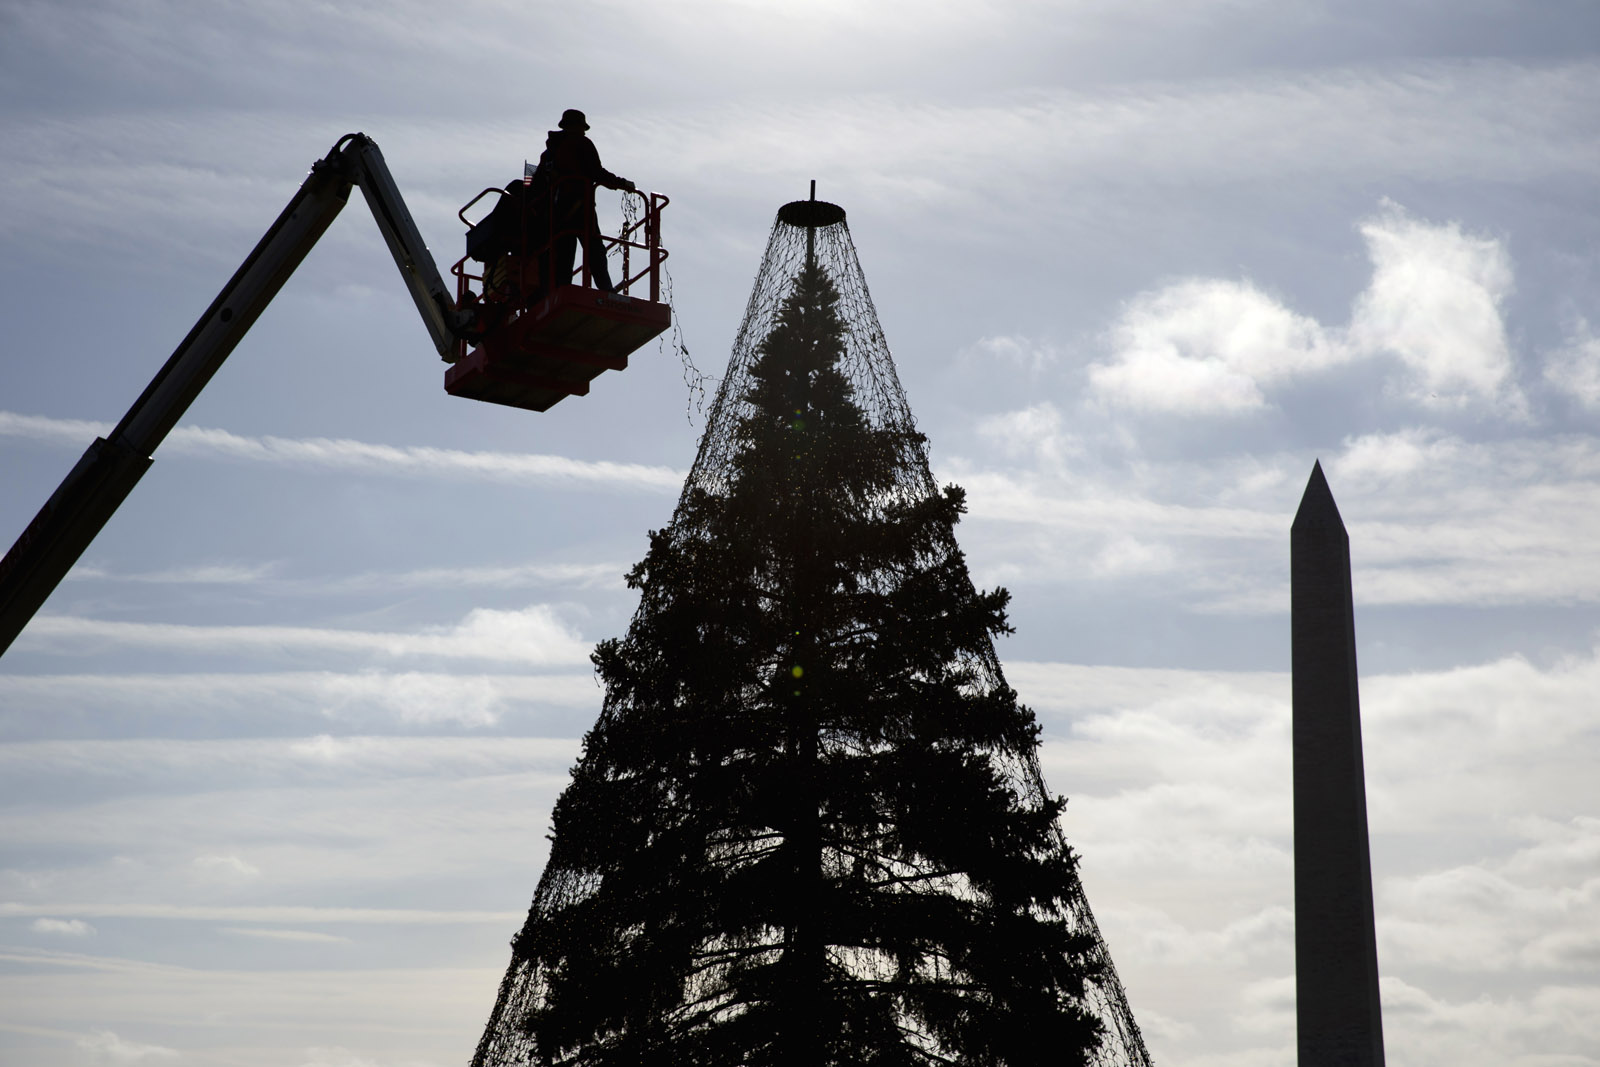 With the Washington Monument at right, Hargrove technicians install lights on the National Christmas Tree, a large evergreen tree in the northeast quadrant of The Ellipse near the White House in this 2015 file photo.  (AP File Photo/Carolyn Kaster)